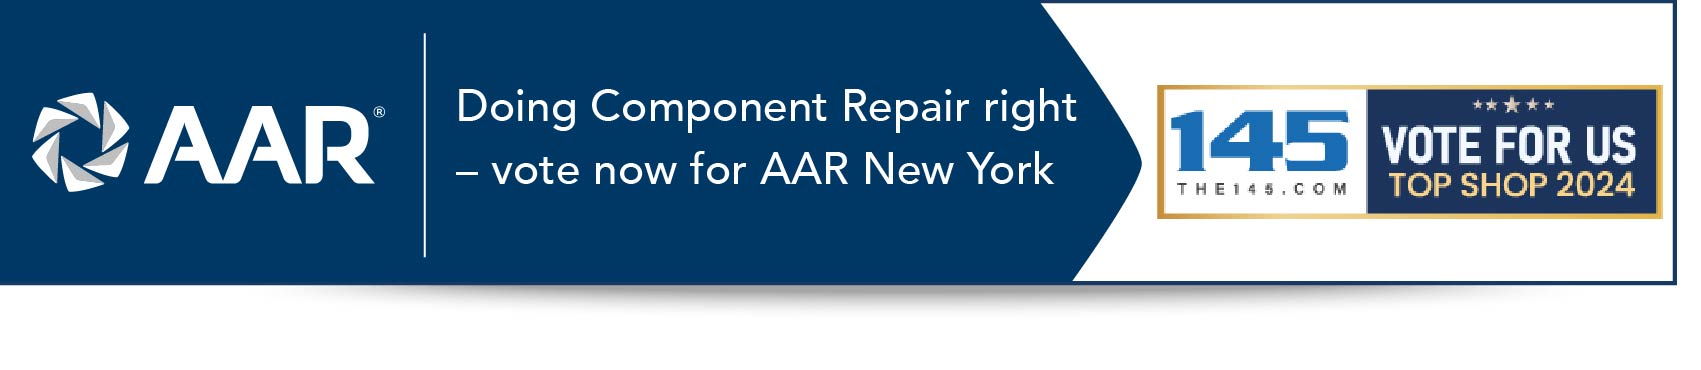 Vote for Component Repair - New York as Your Top Shop